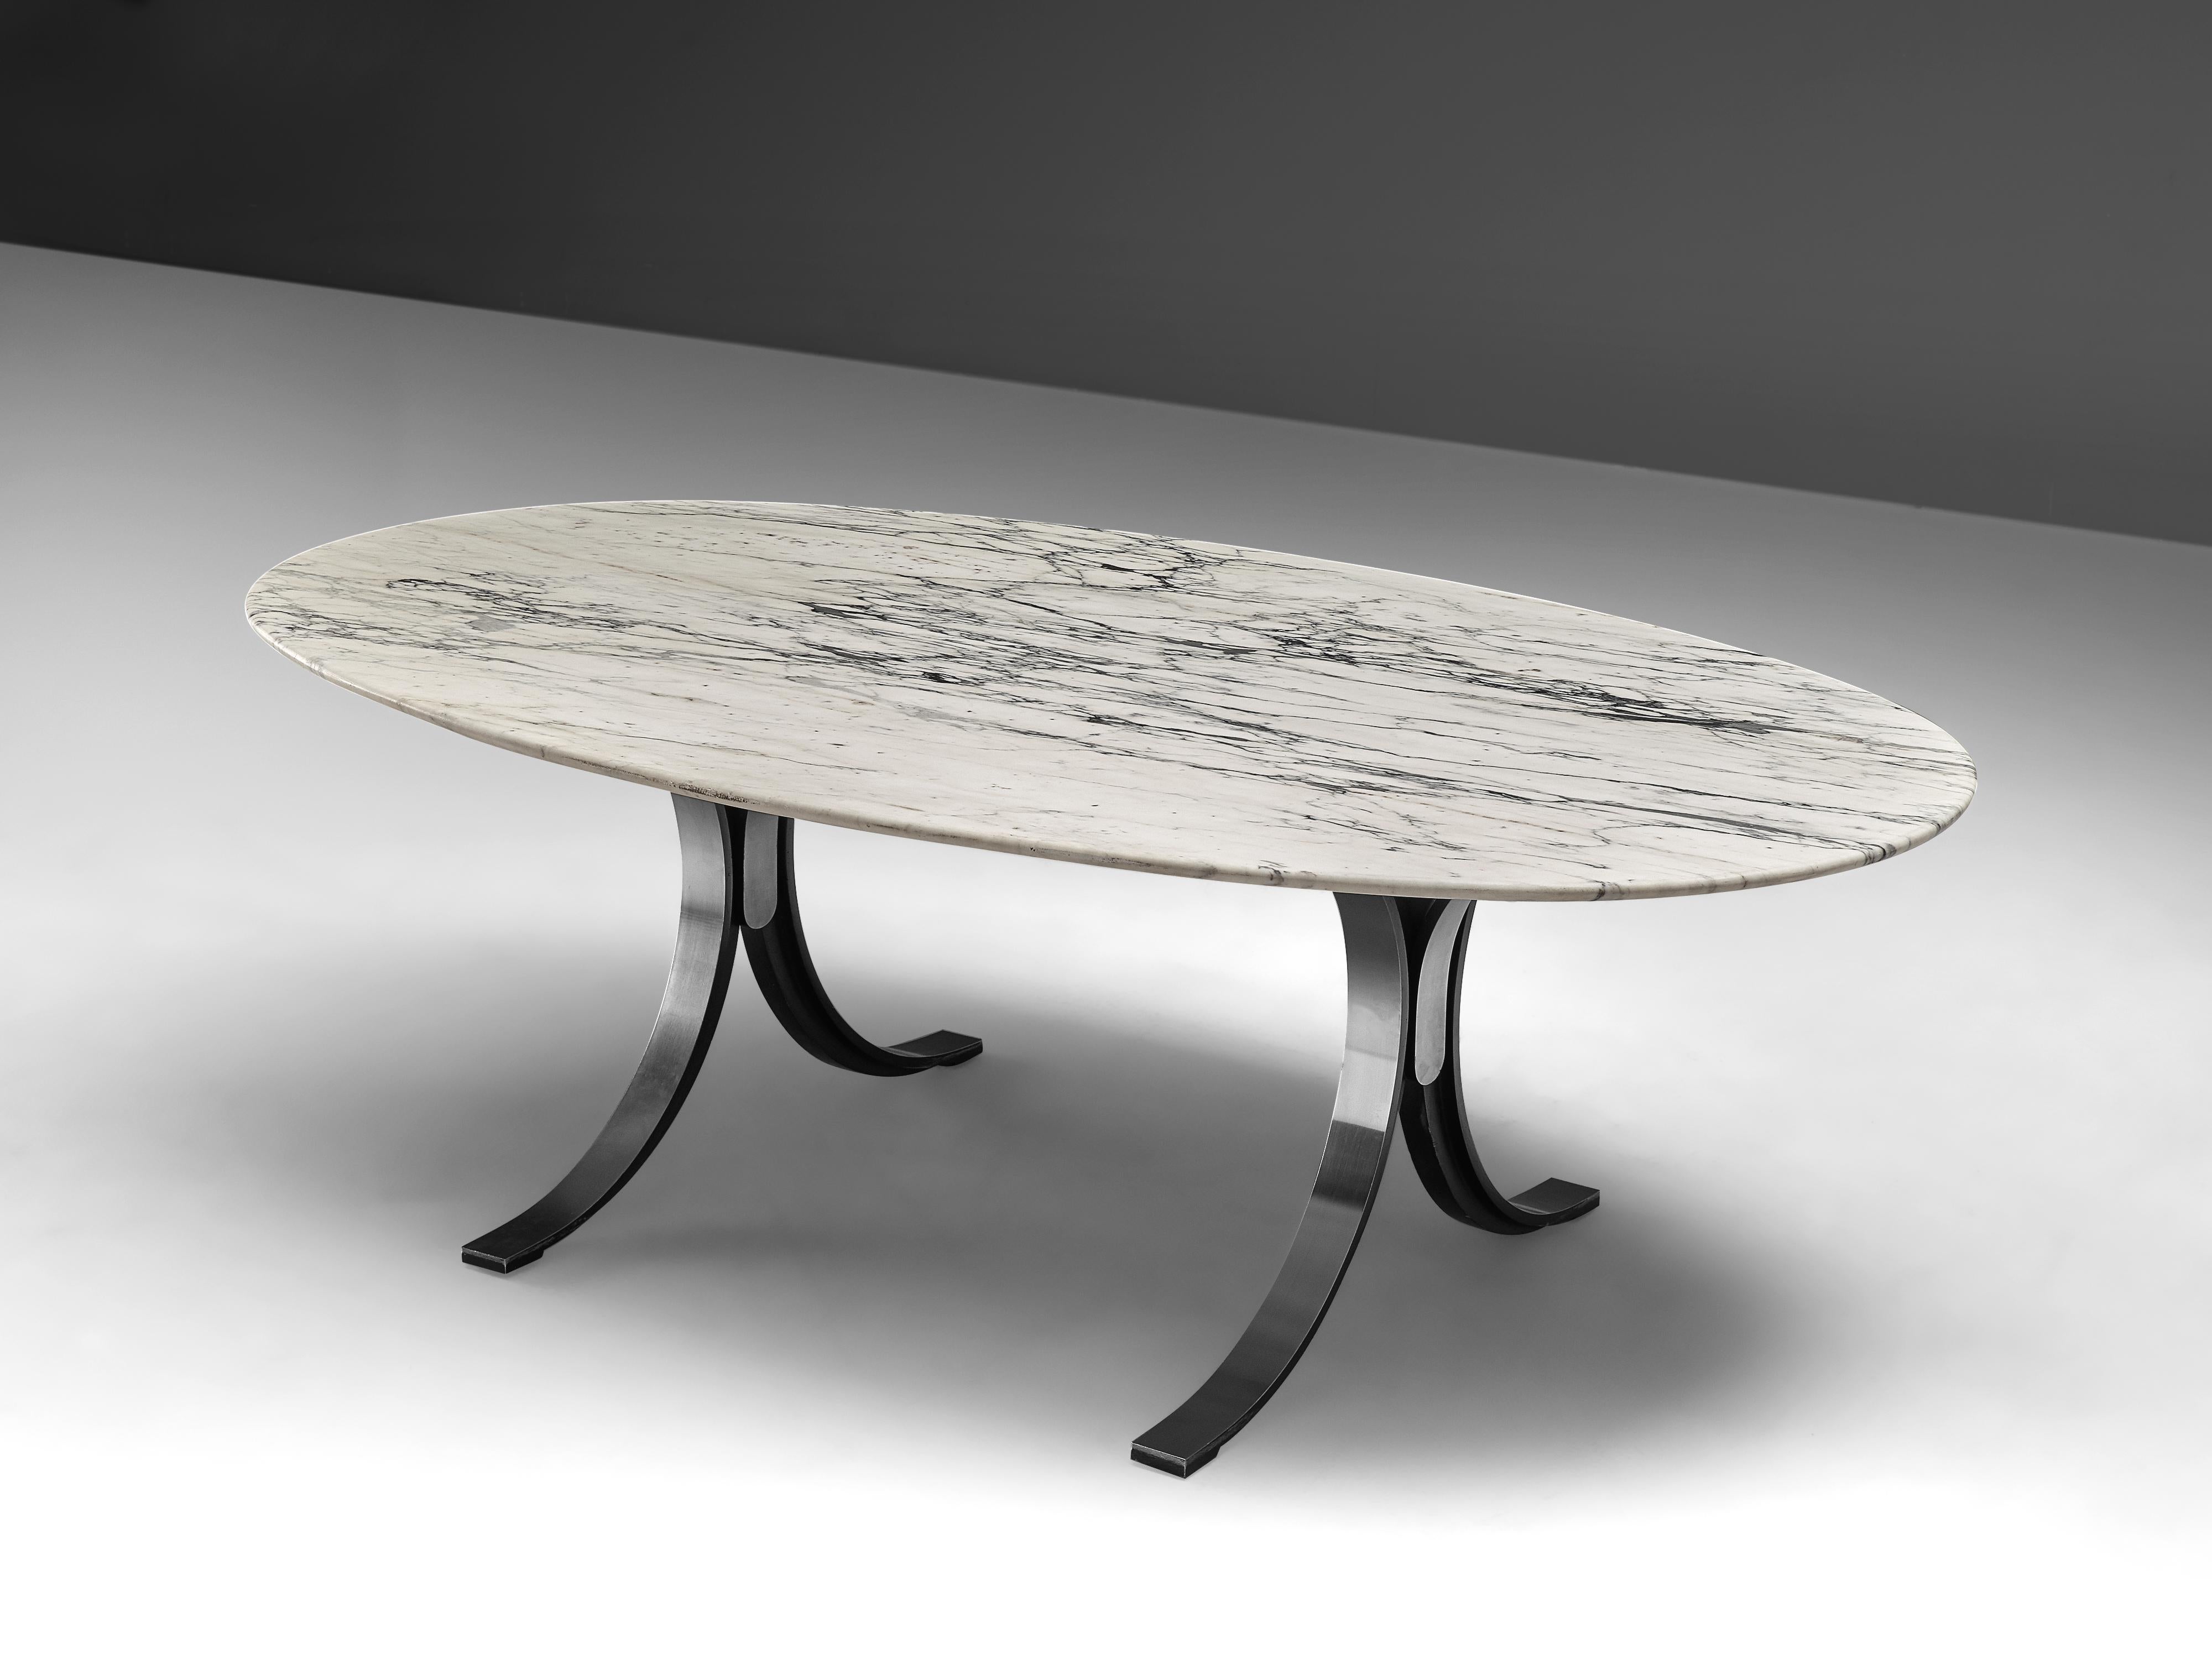 Osvaldo Borsani for Tecno, dining table T 102, Carrara marble, chrome-plated steel, Italy, 1964

This elegant white marble top shows amazing veins in shades of grey. The top is positioned on top of four outward bending legs in chrome-plated steel.